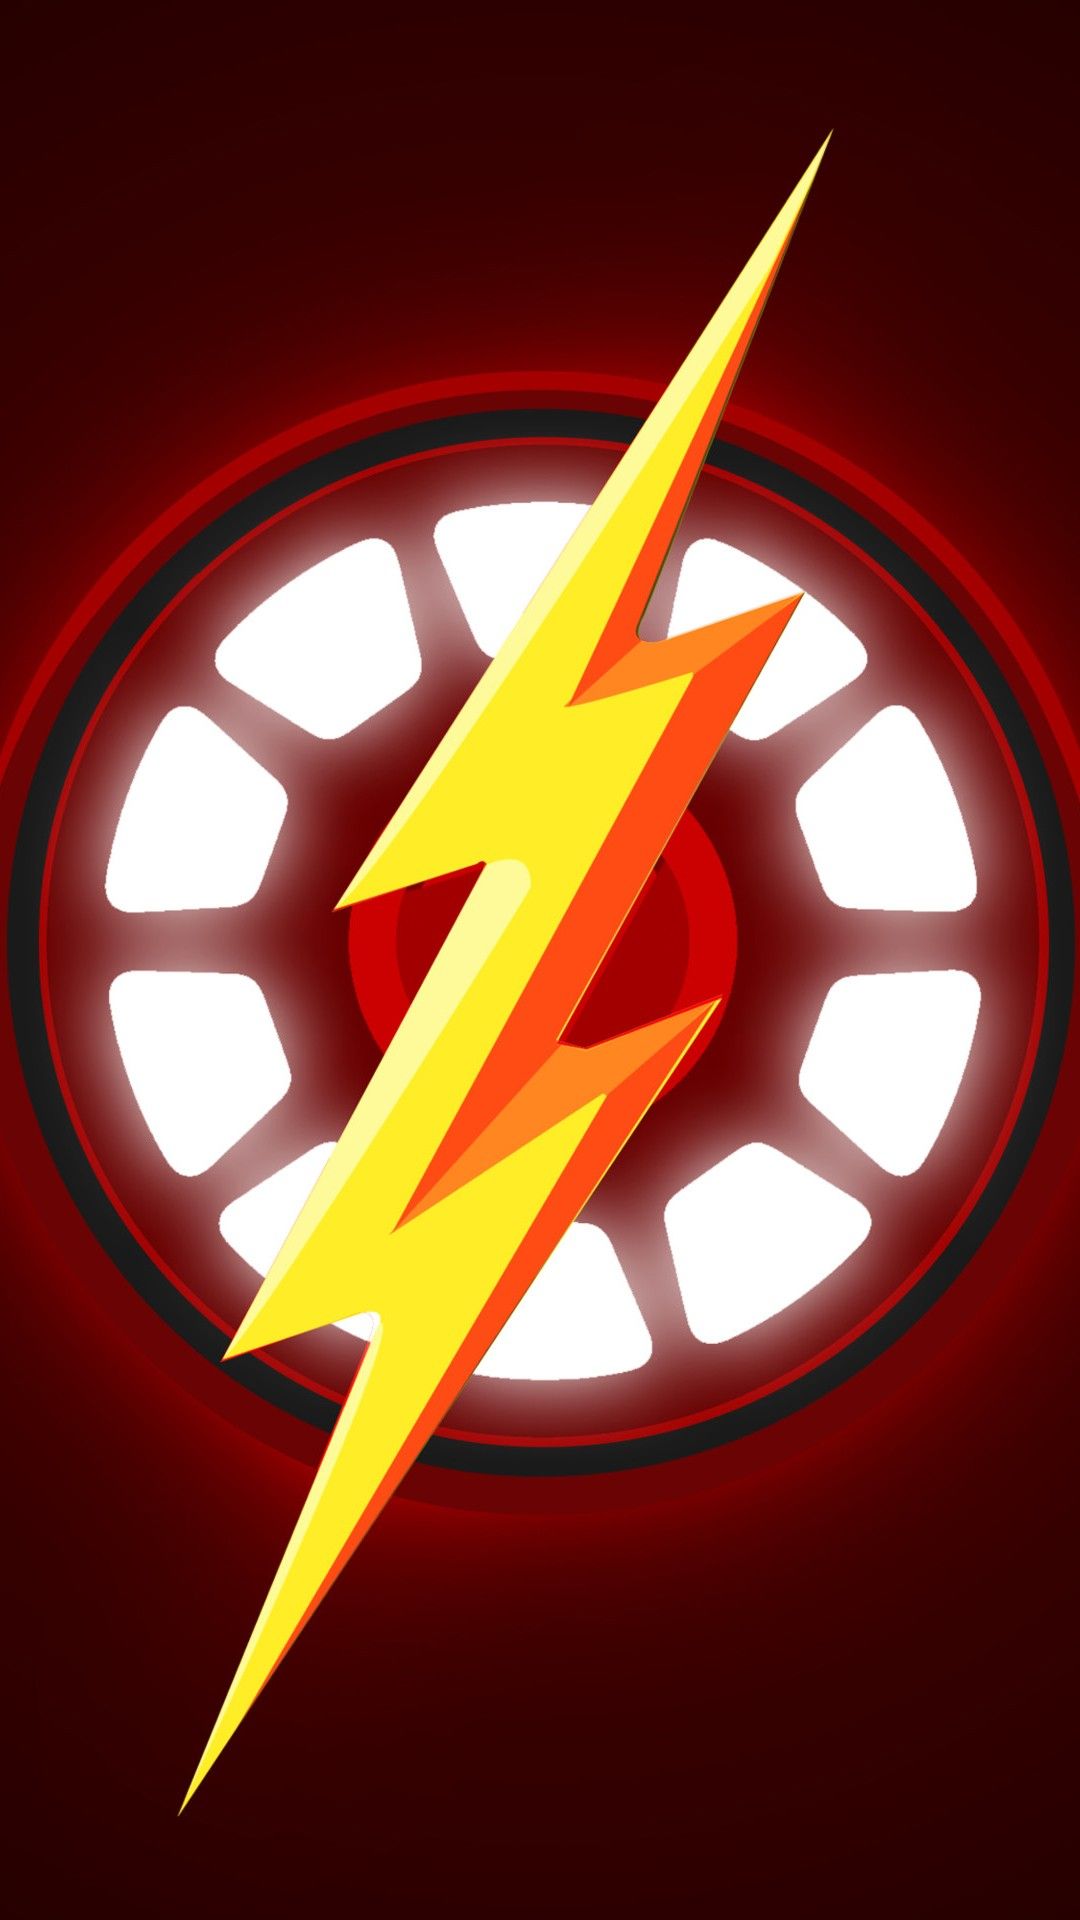 The Flash Wallpaper For Android Wallpaper HD For Android